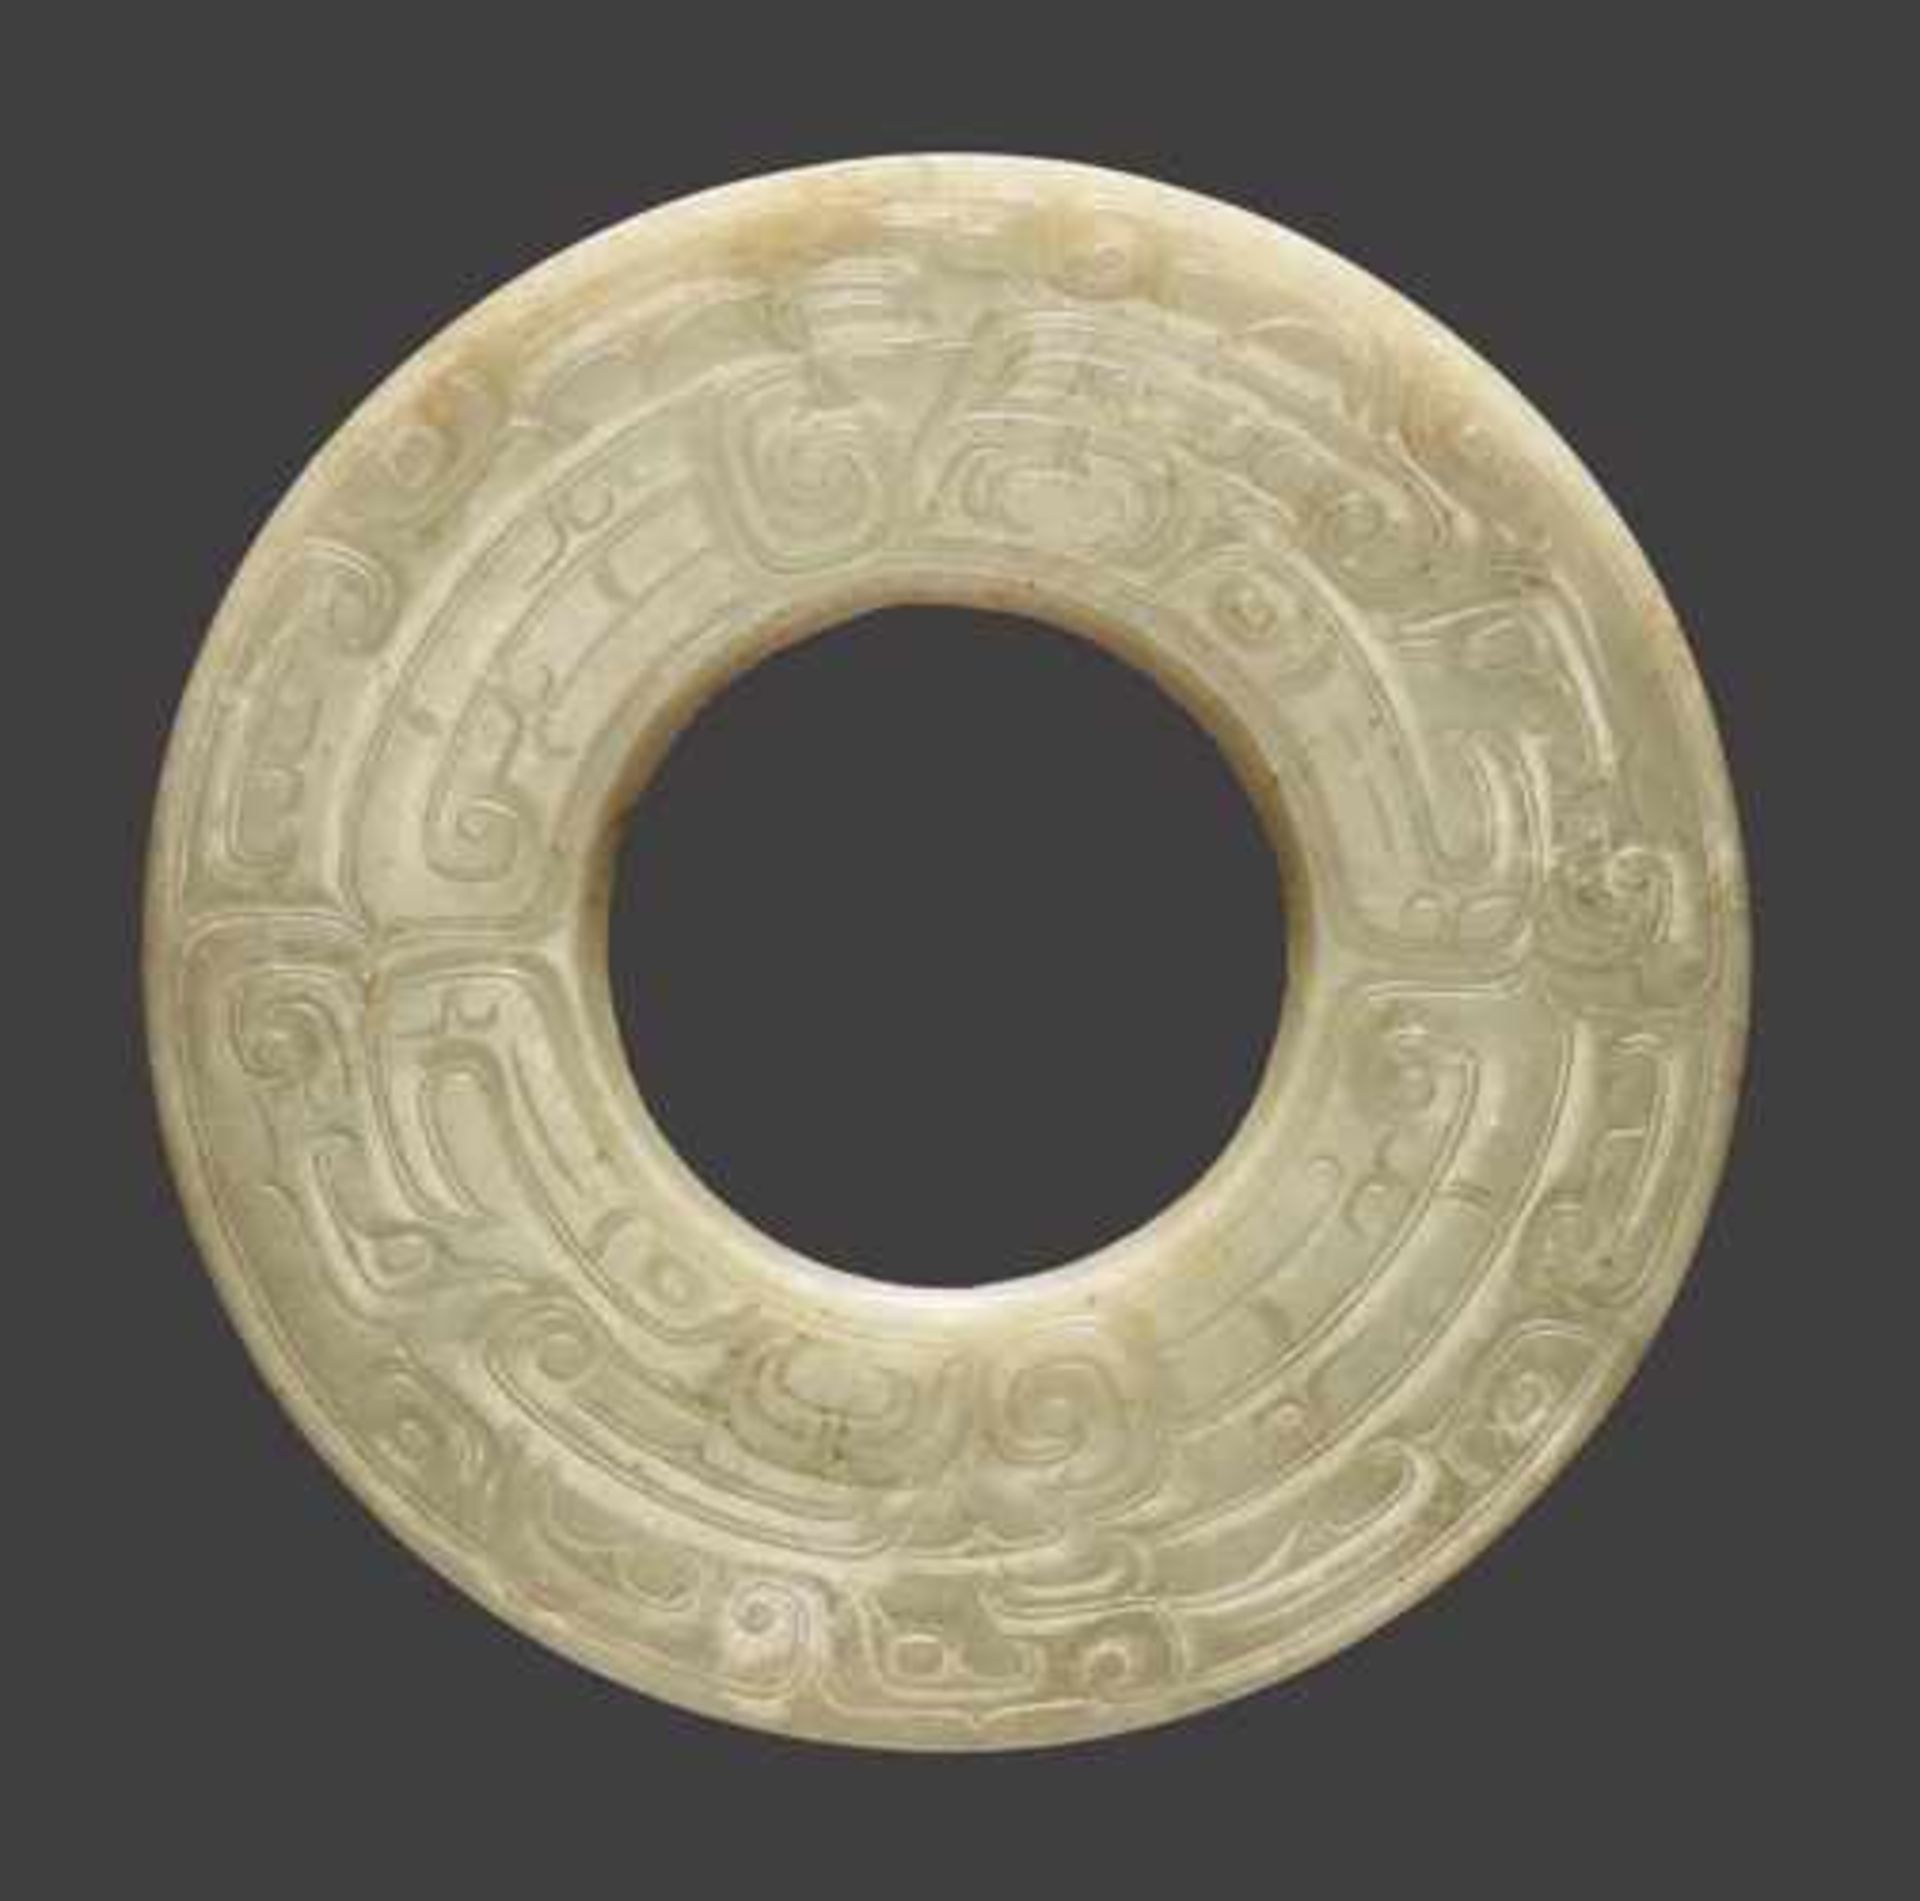 A LARGE DISC IN LIGHT GREEN JADE WITH A DOUBLE ONELEGGED DRAGON (KUI) DESIGN Jade, China. Late - Image 2 of 6